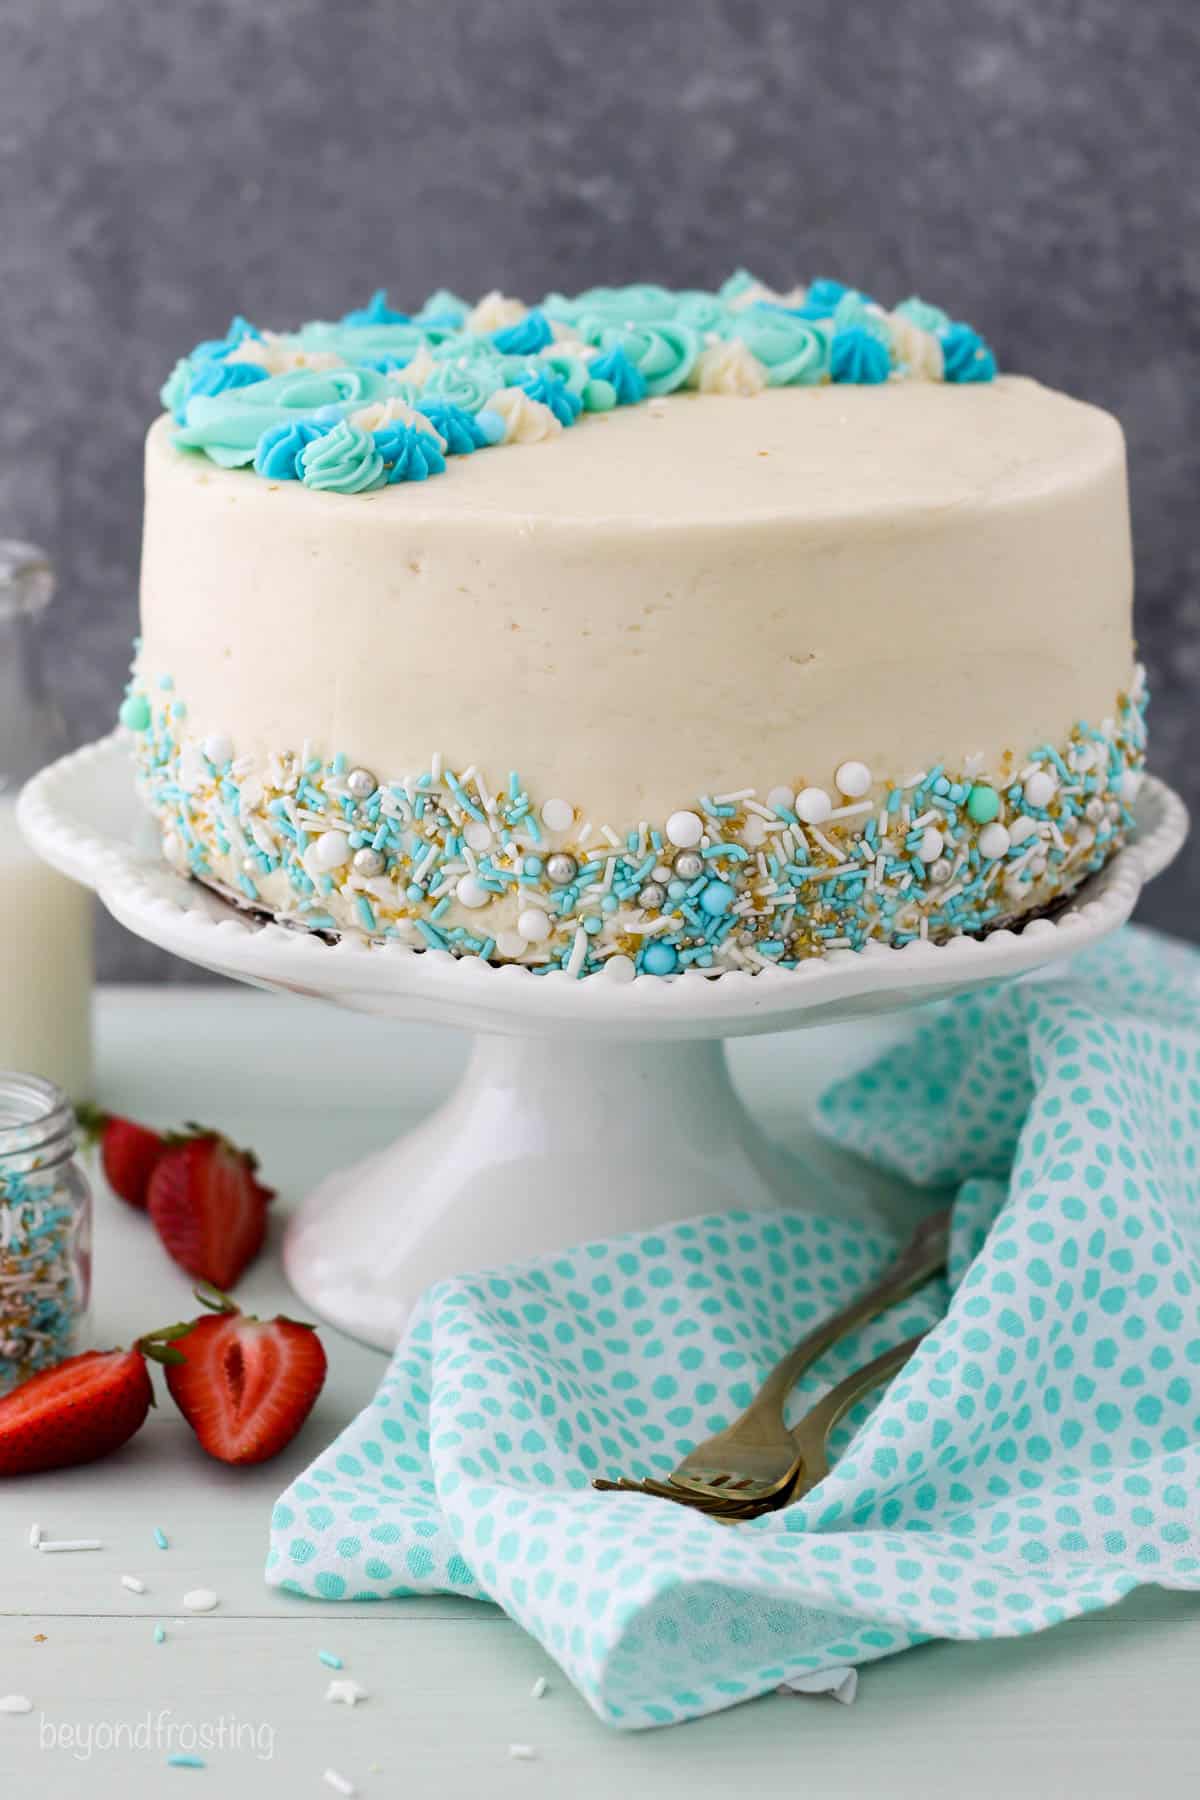 A vanilla cake with blue sprinkles on a white cake stand